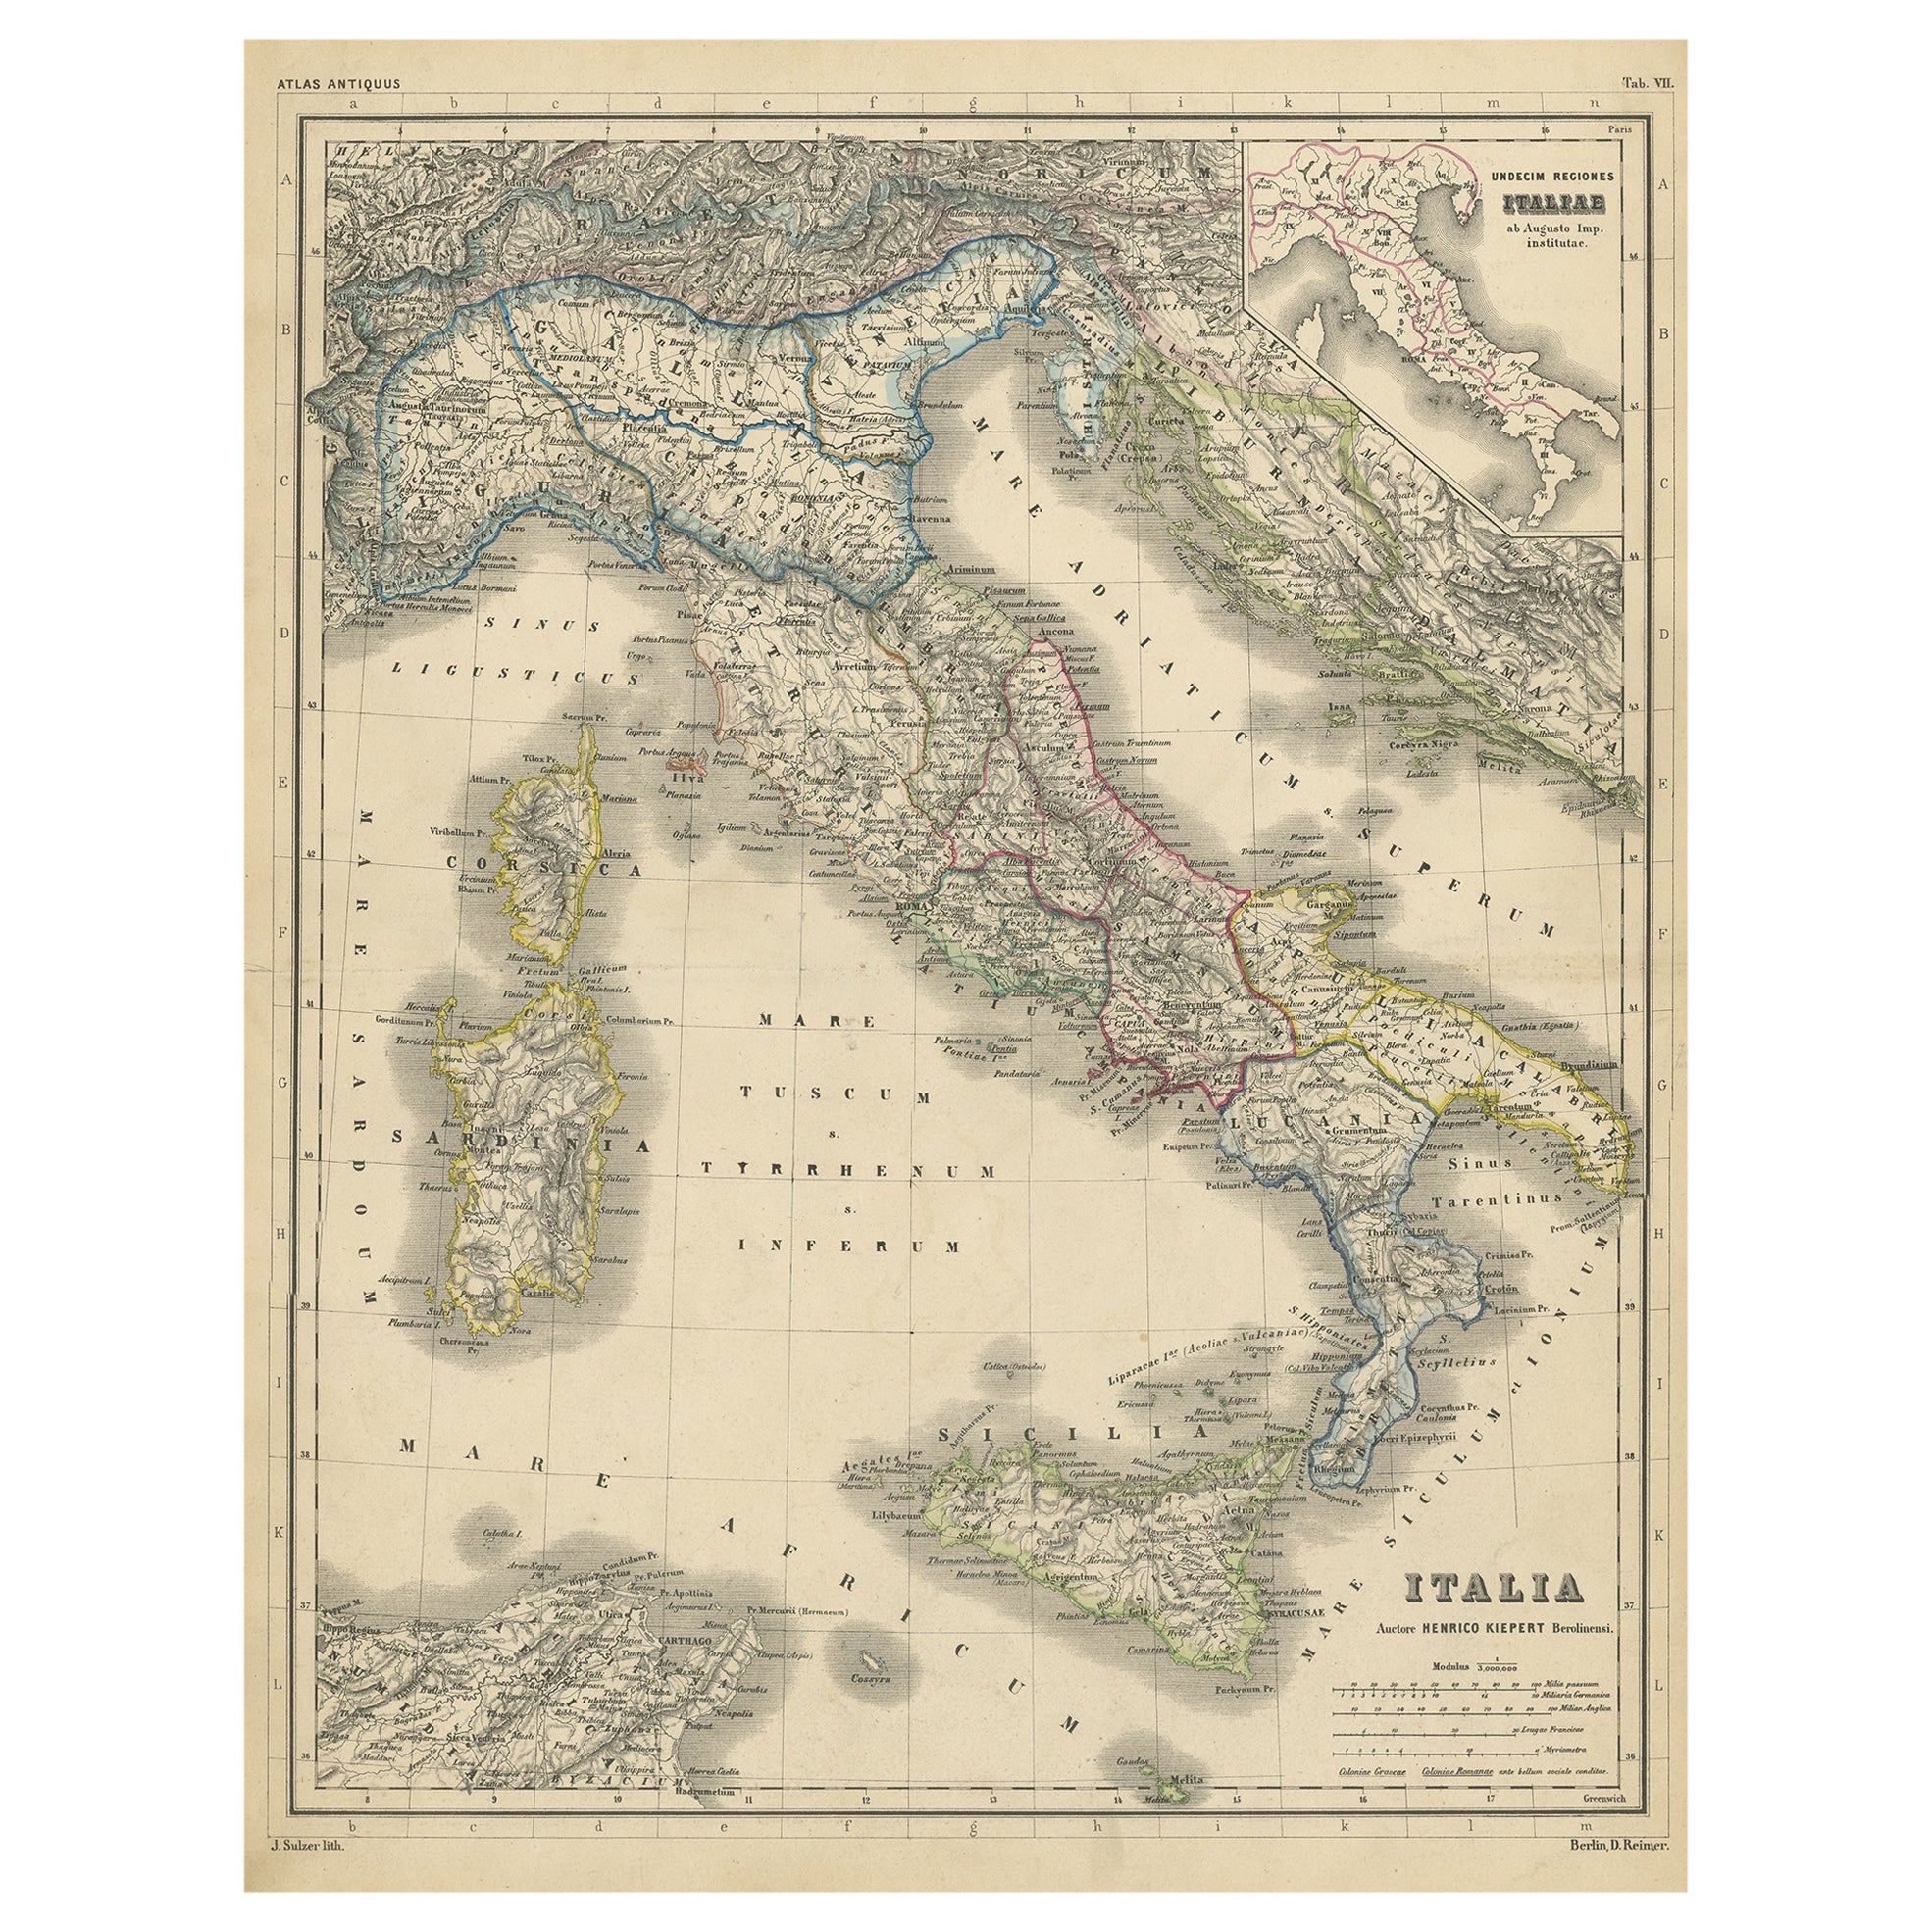 Attractive Antique Map of Italy with Inset of Maps Showing The Regions, c.1870